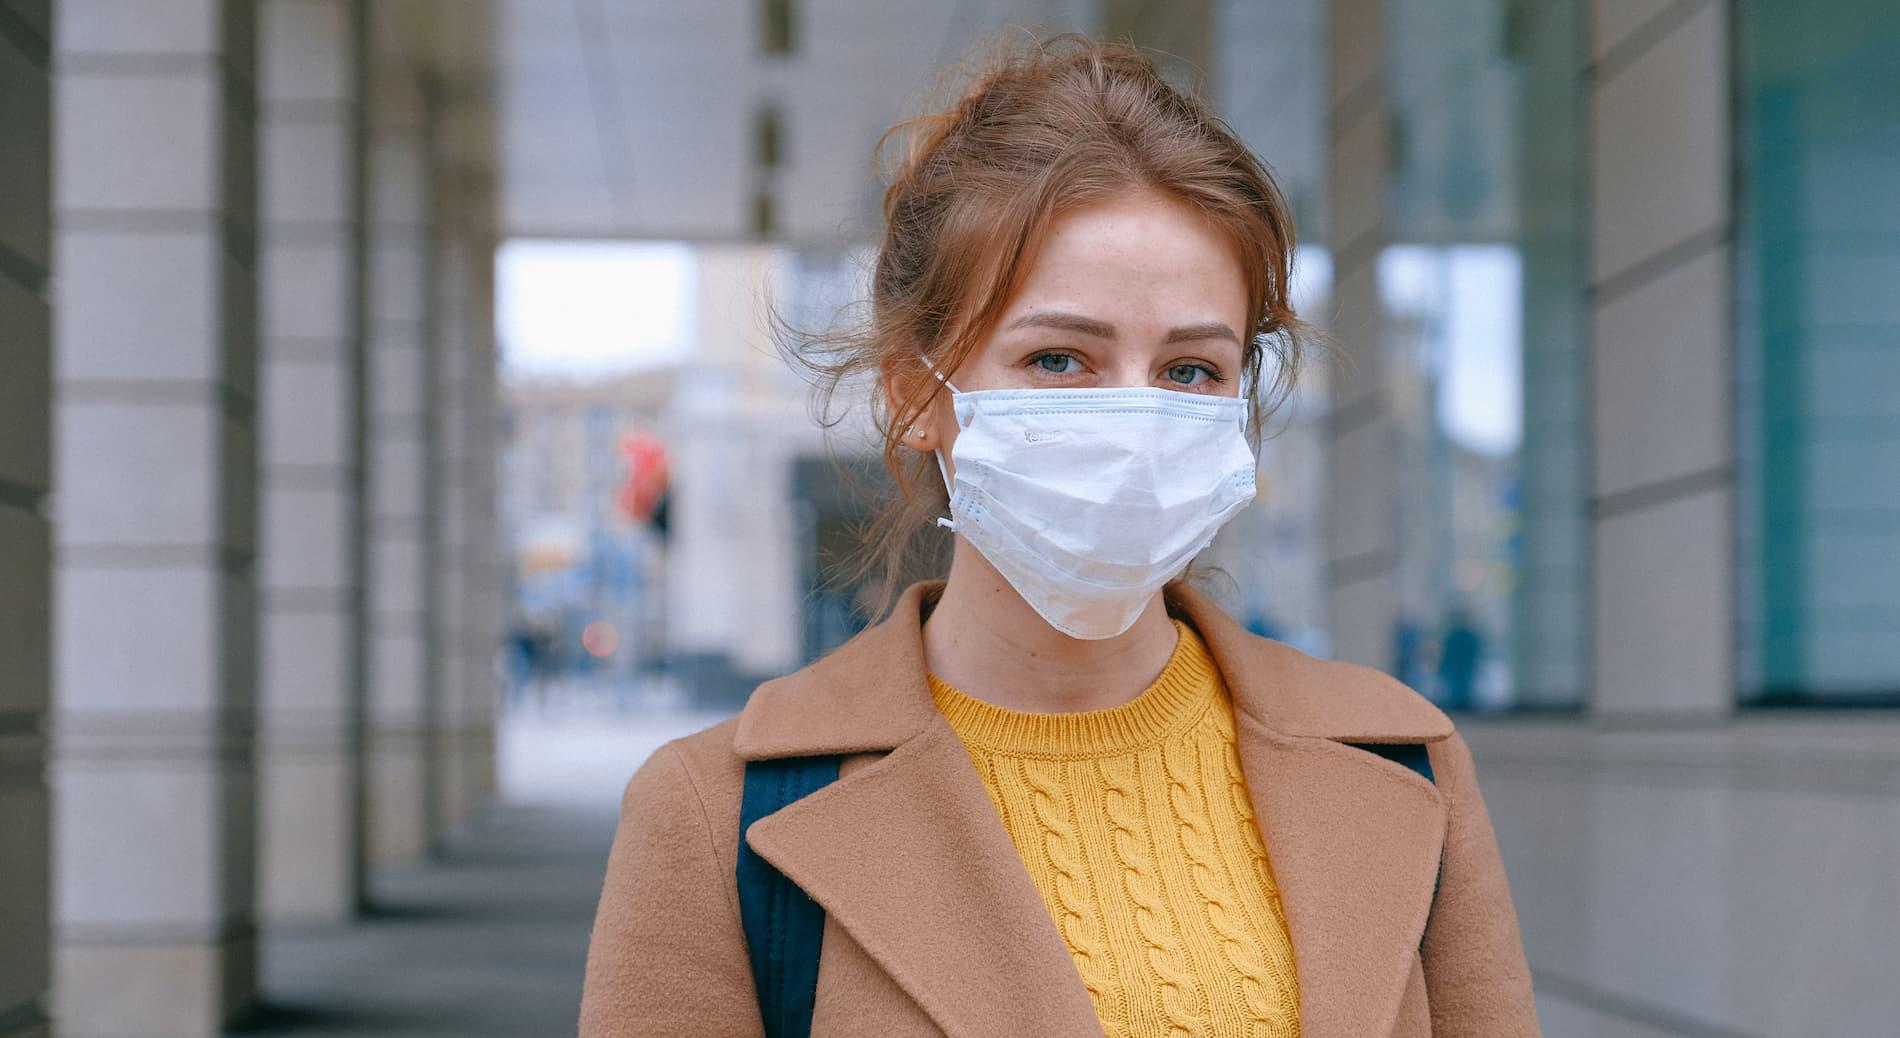 Woman wearing surgical face mask